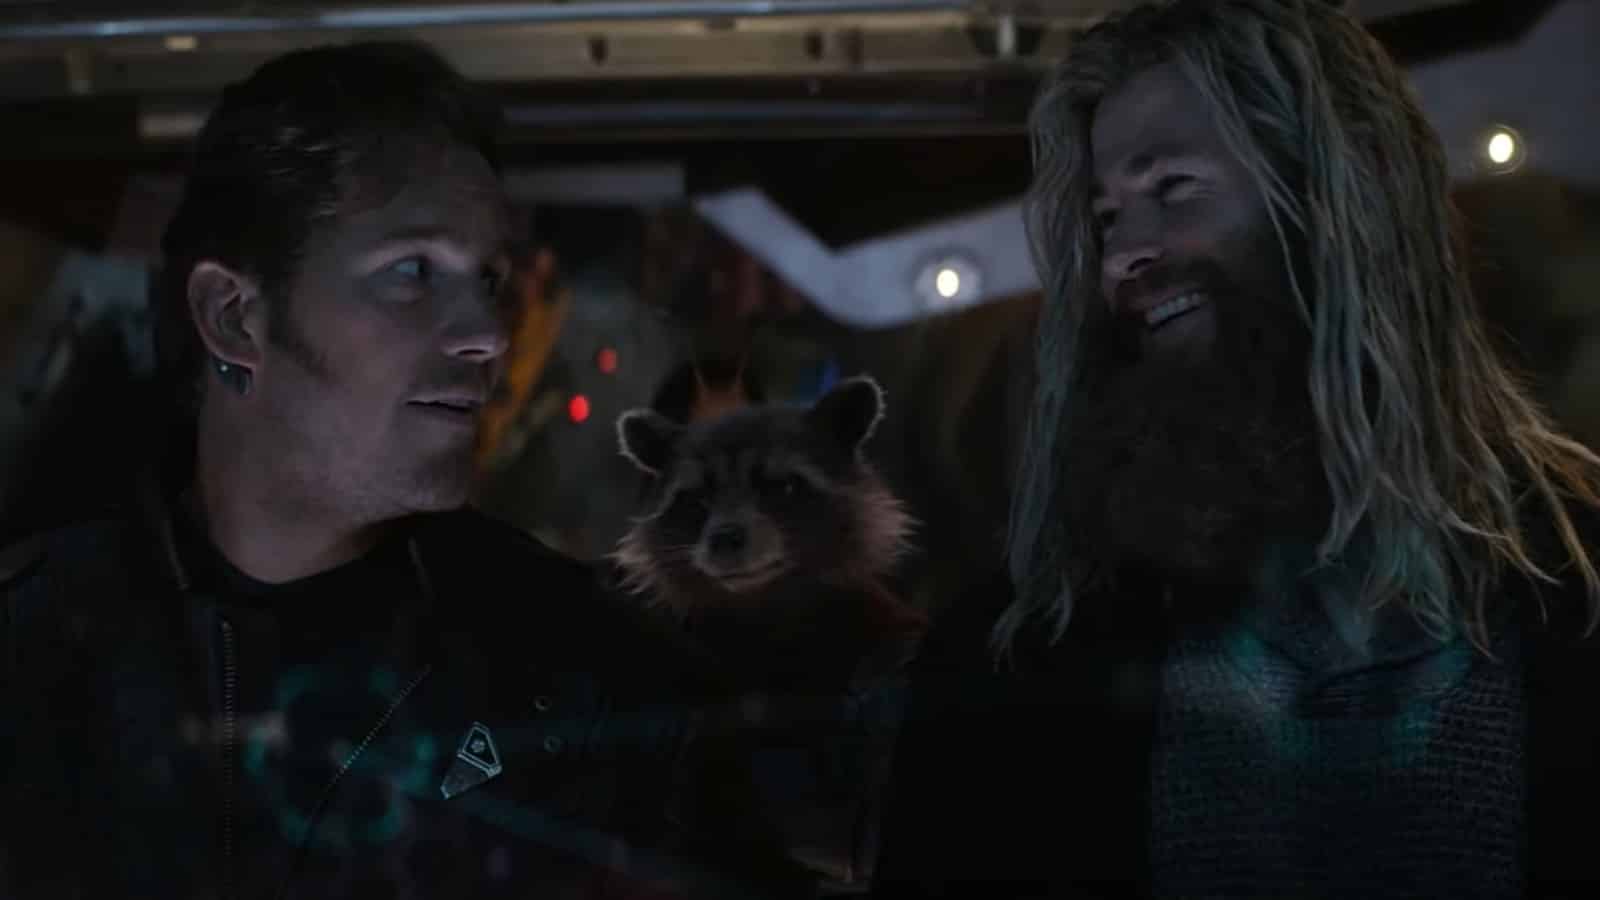 Thor and Star Lord in Marvel's Avengers: Endgame